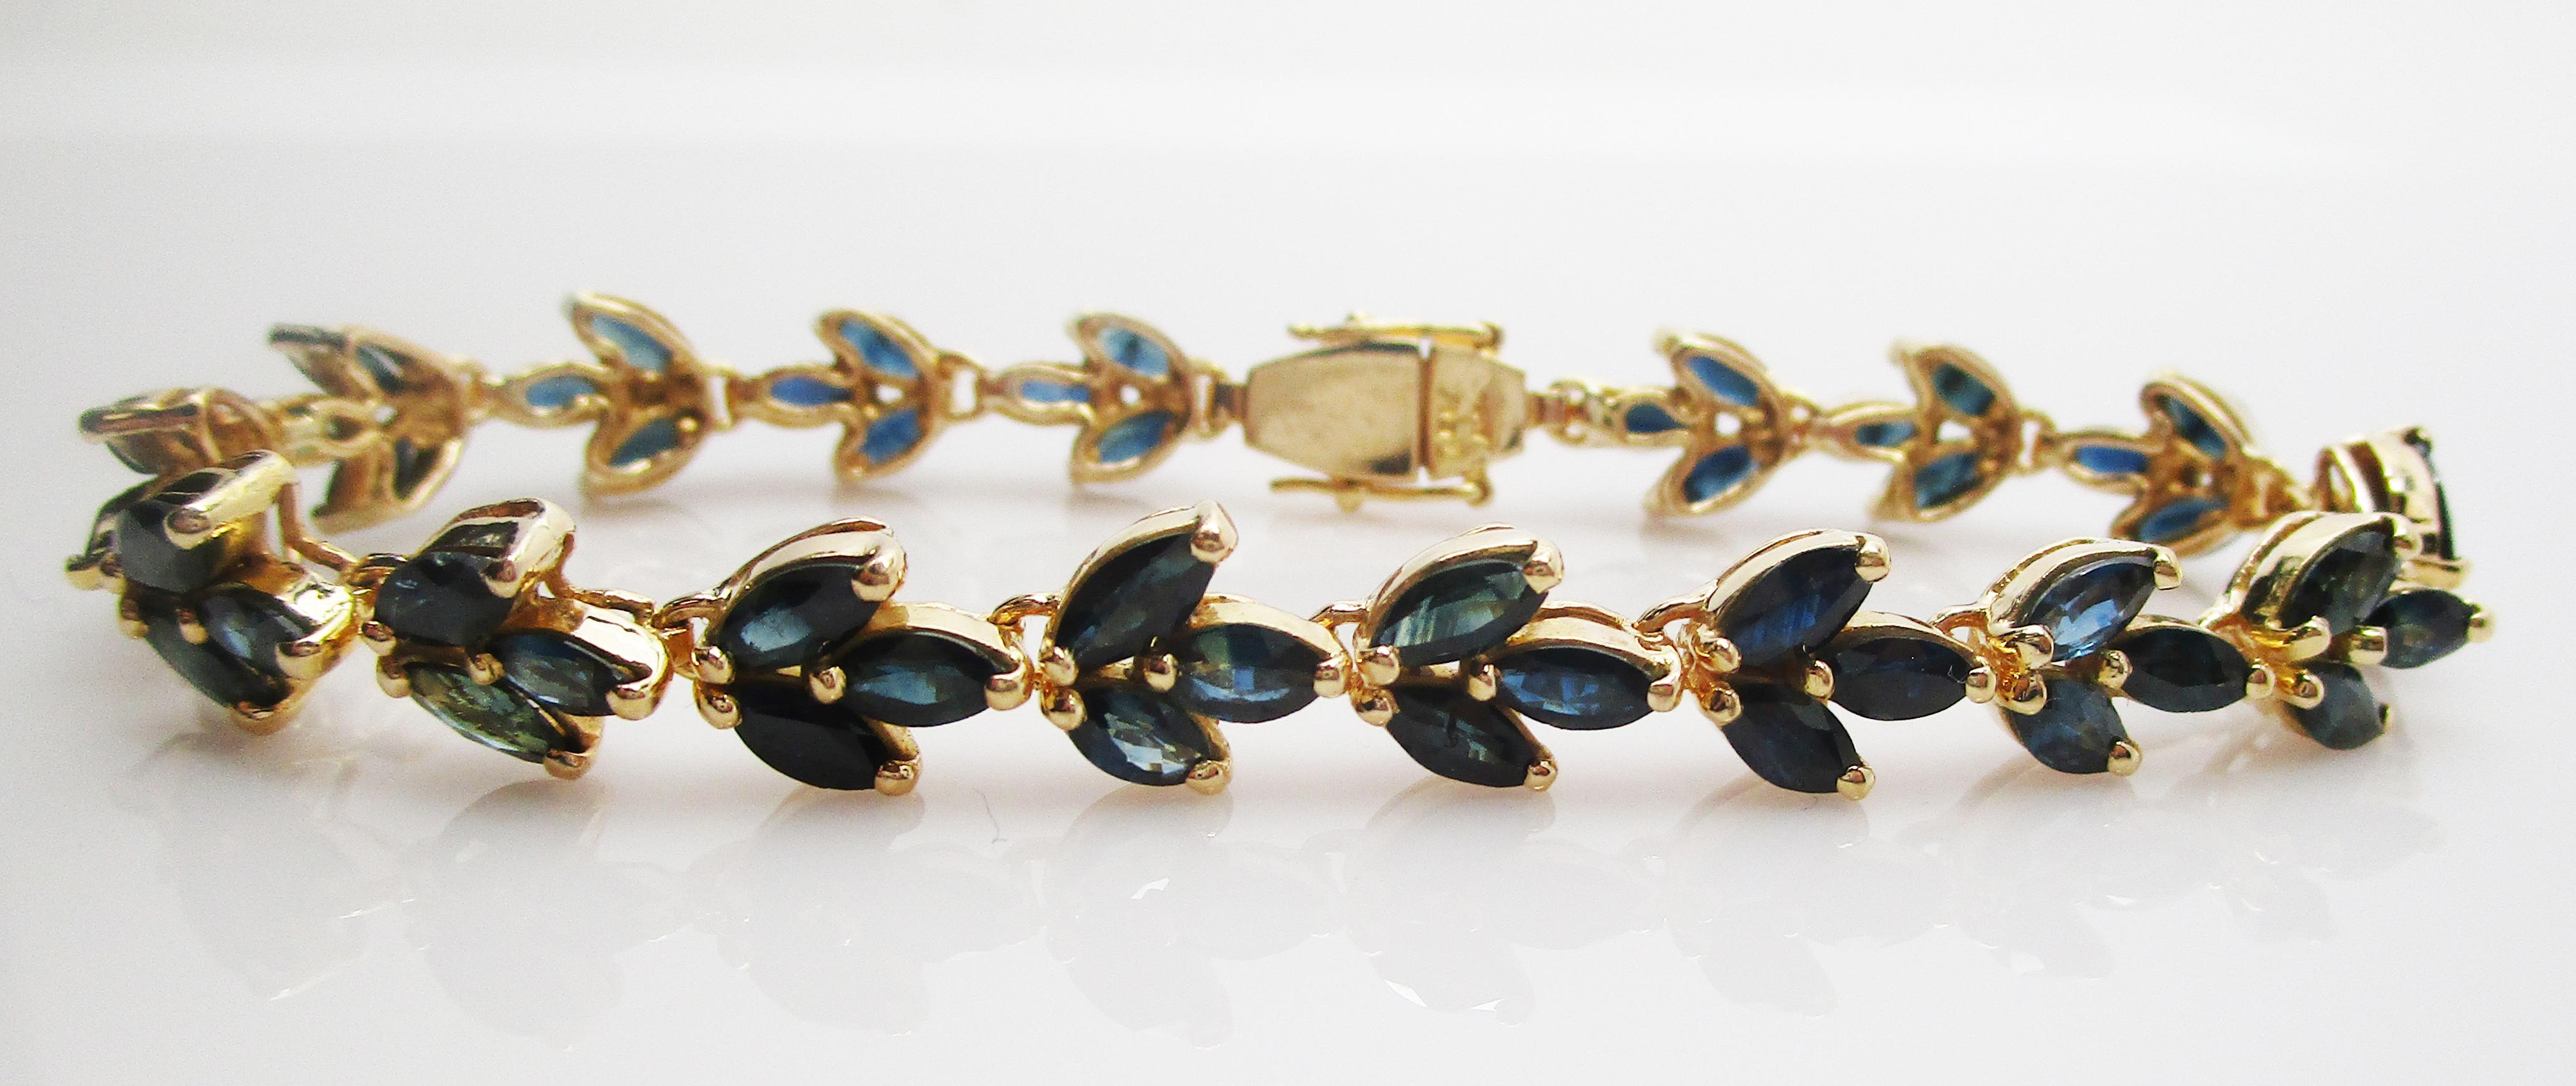 This is a lovely bracelet in 18k yellow gold with a stunning array of gorgeous blue sapphires! The marquise sapphires are set in a leaf-like pattern that creates a line bracelet that is a classic design with a unique twist! The combination of royal